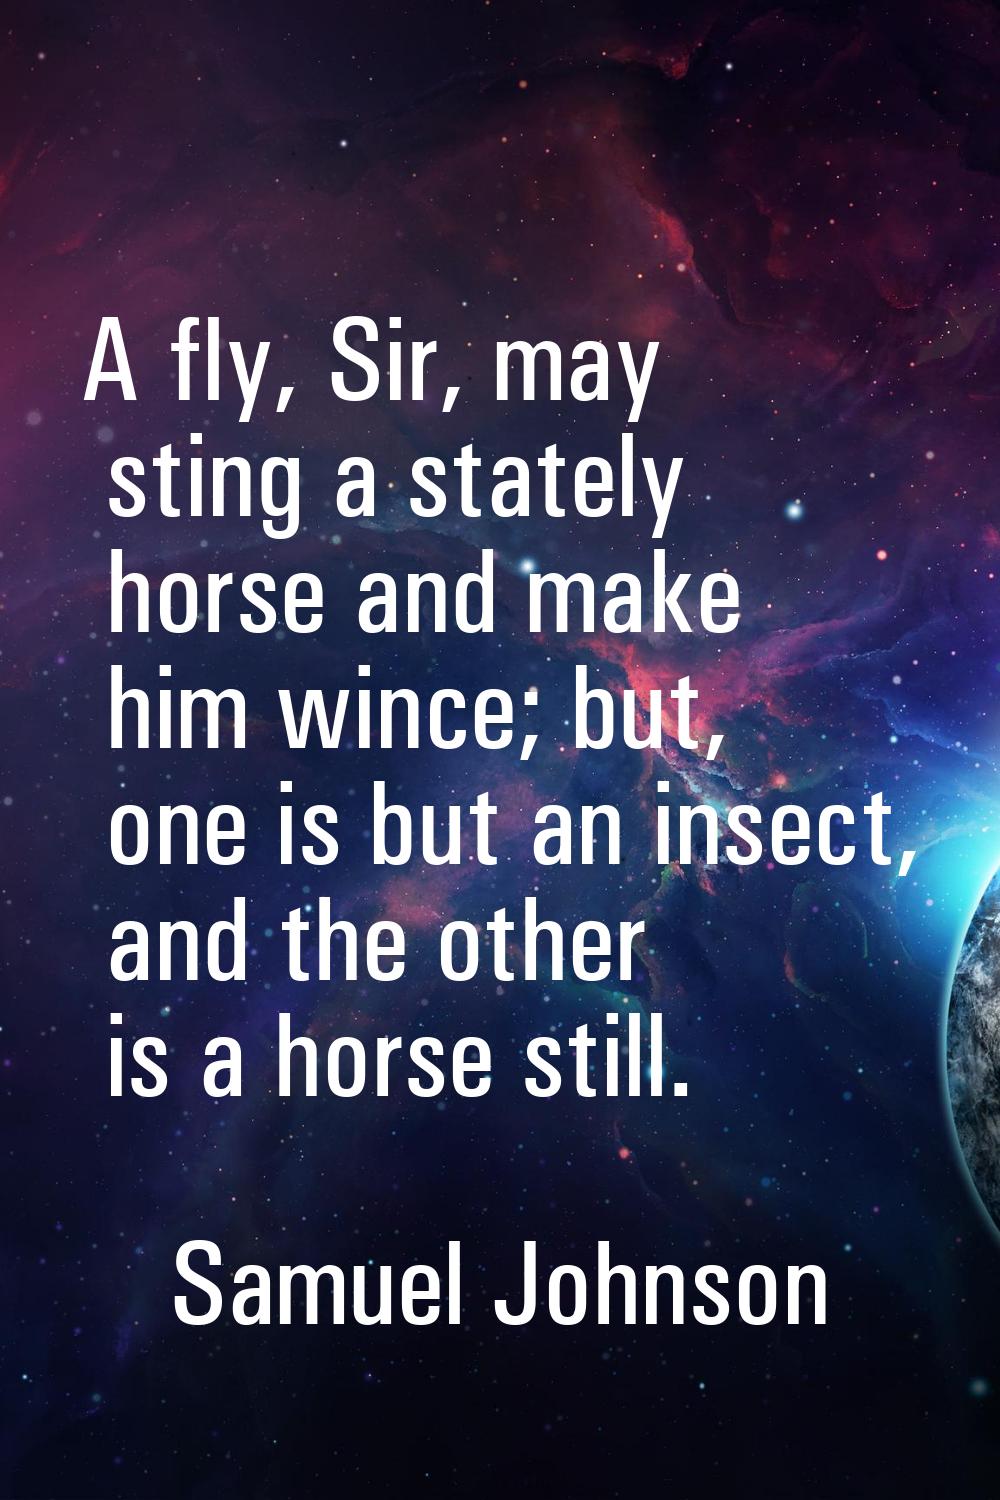 A fly, Sir, may sting a stately horse and make him wince; but, one is but an insect, and the other 